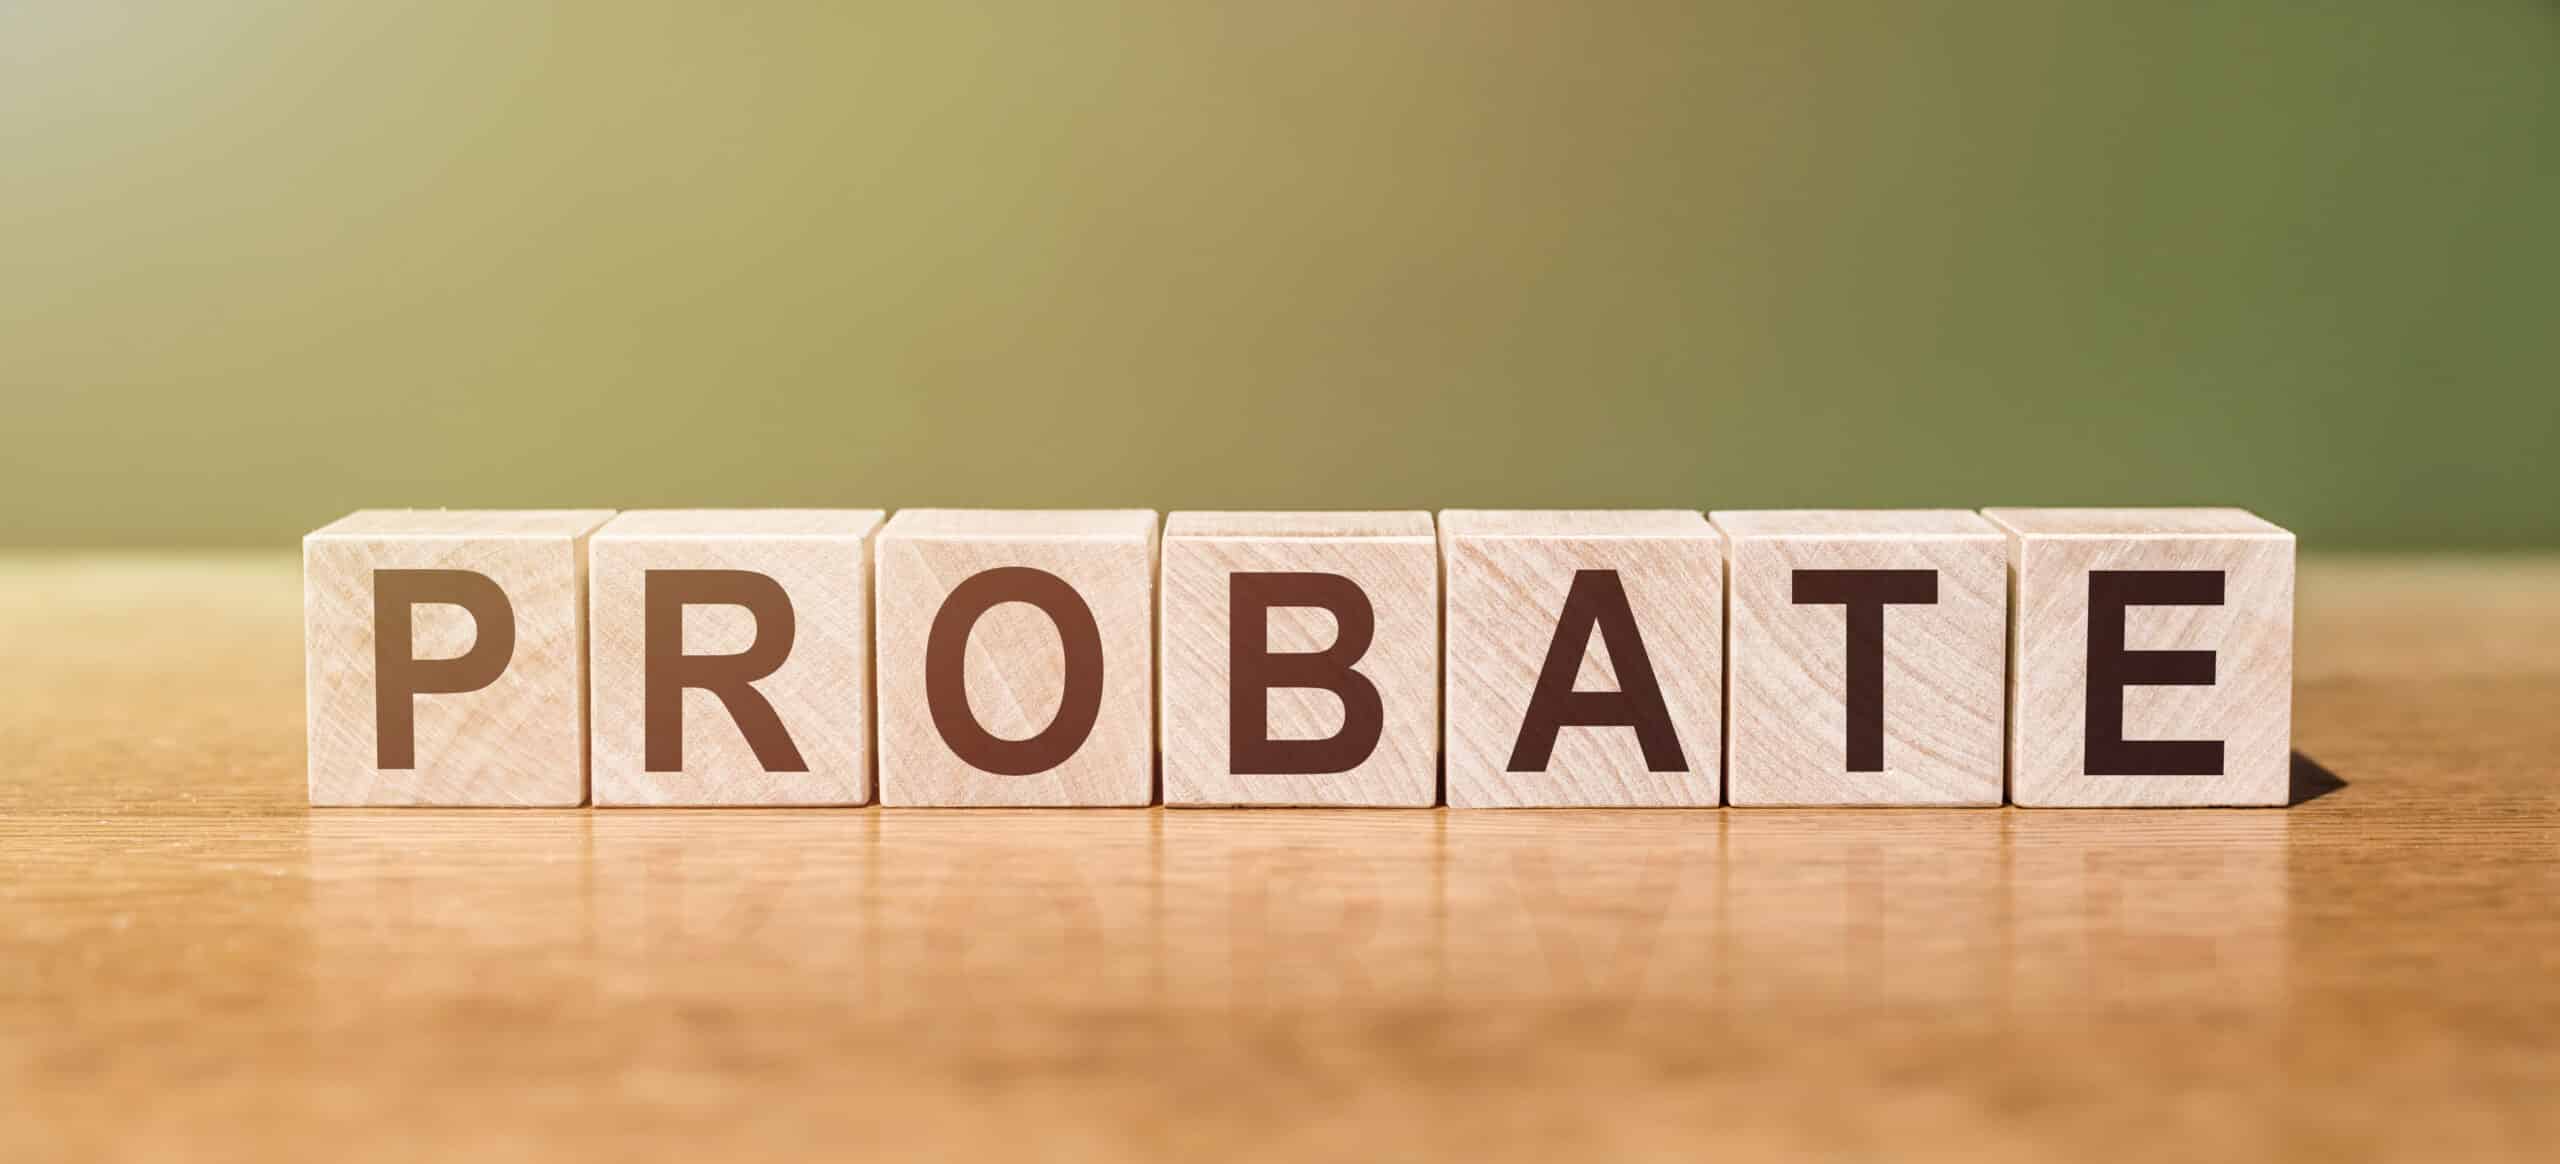 4 Common Houston, TX, Probate Problems | The Probate Law Group